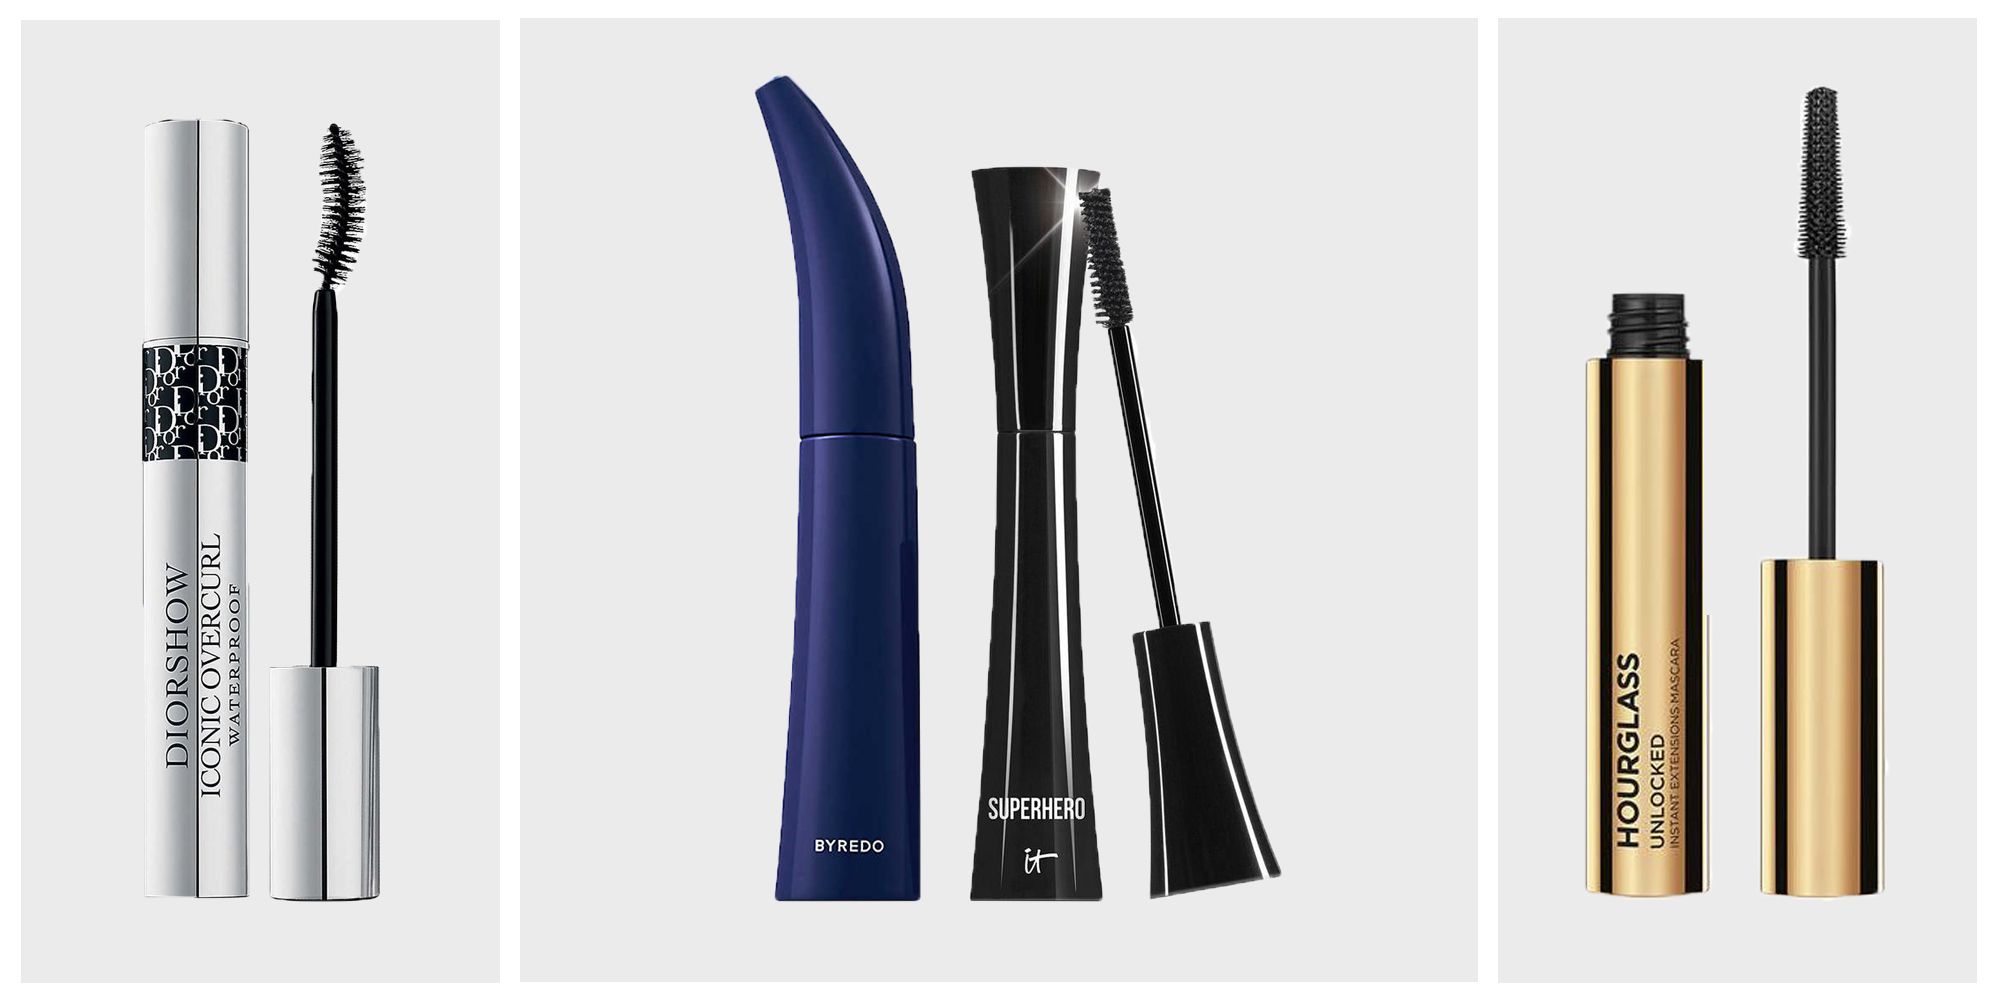 Best Mascara |15 top mascaras for length, volume, and colour